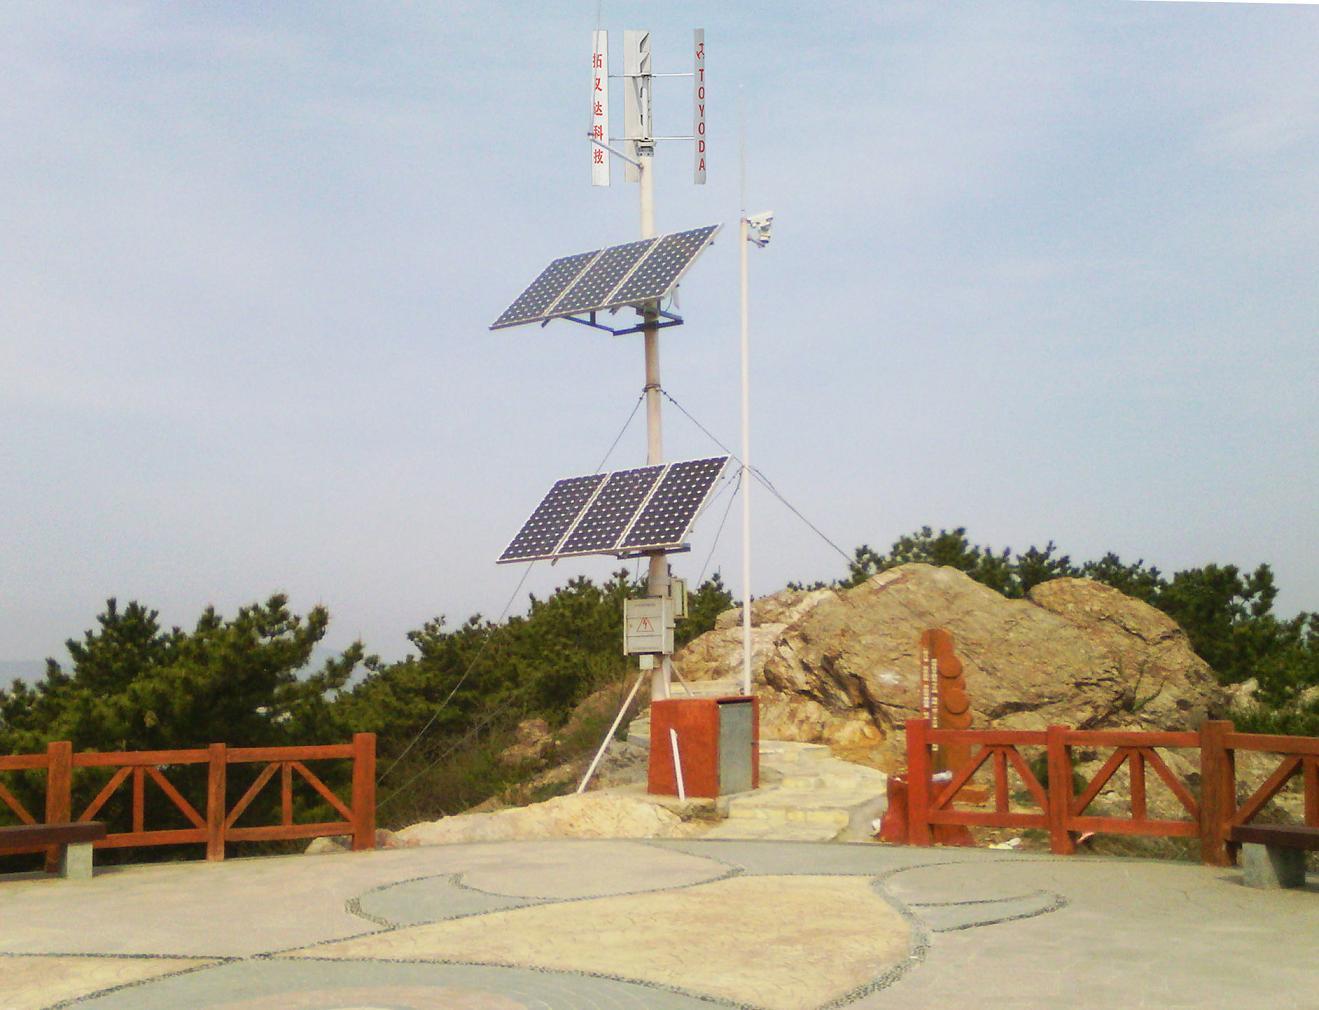 Wind solar hybrid power supply system for monitoring installed in viewing tower in Dalian city